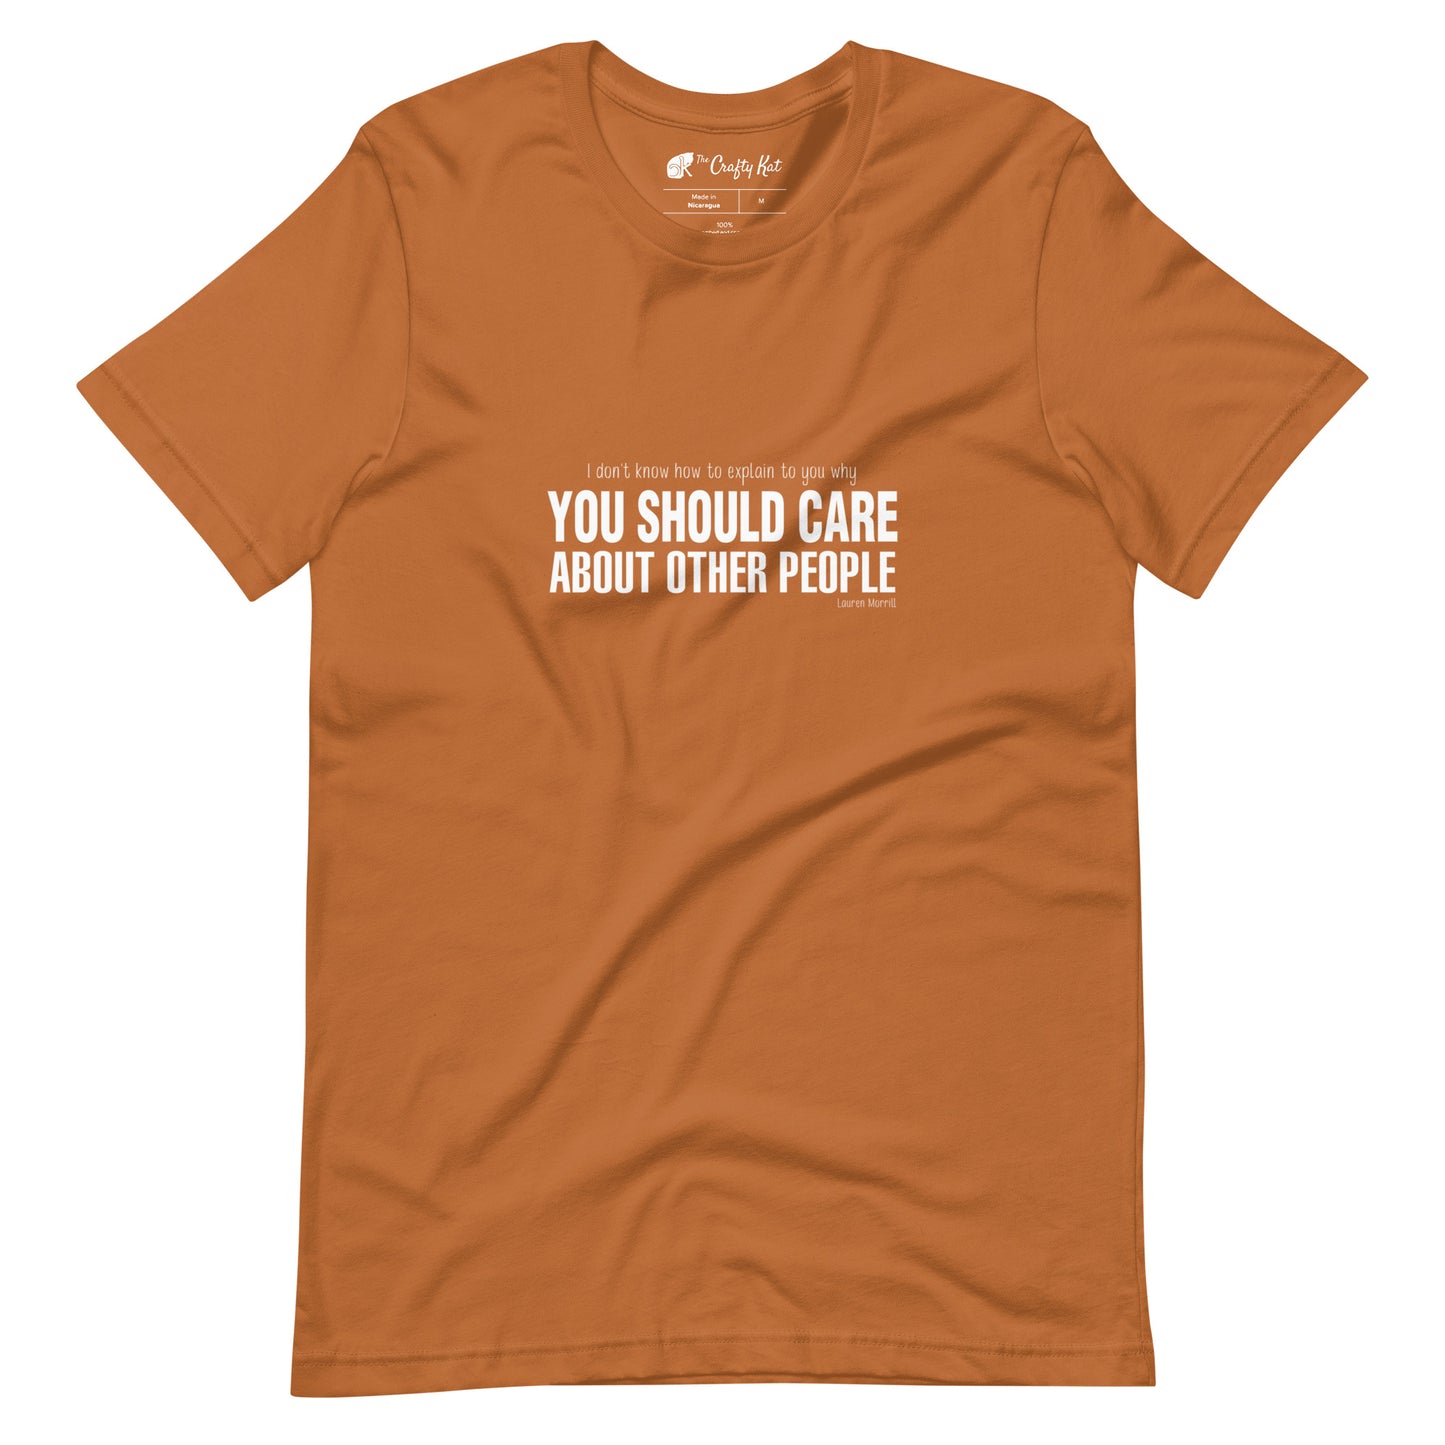 Toast (yellow orange) t-shirt with quote by Lauren Morrill: "I don't know how to explain to you why YOU SHOULD CARE ABOUT OTHER PEOPLE"